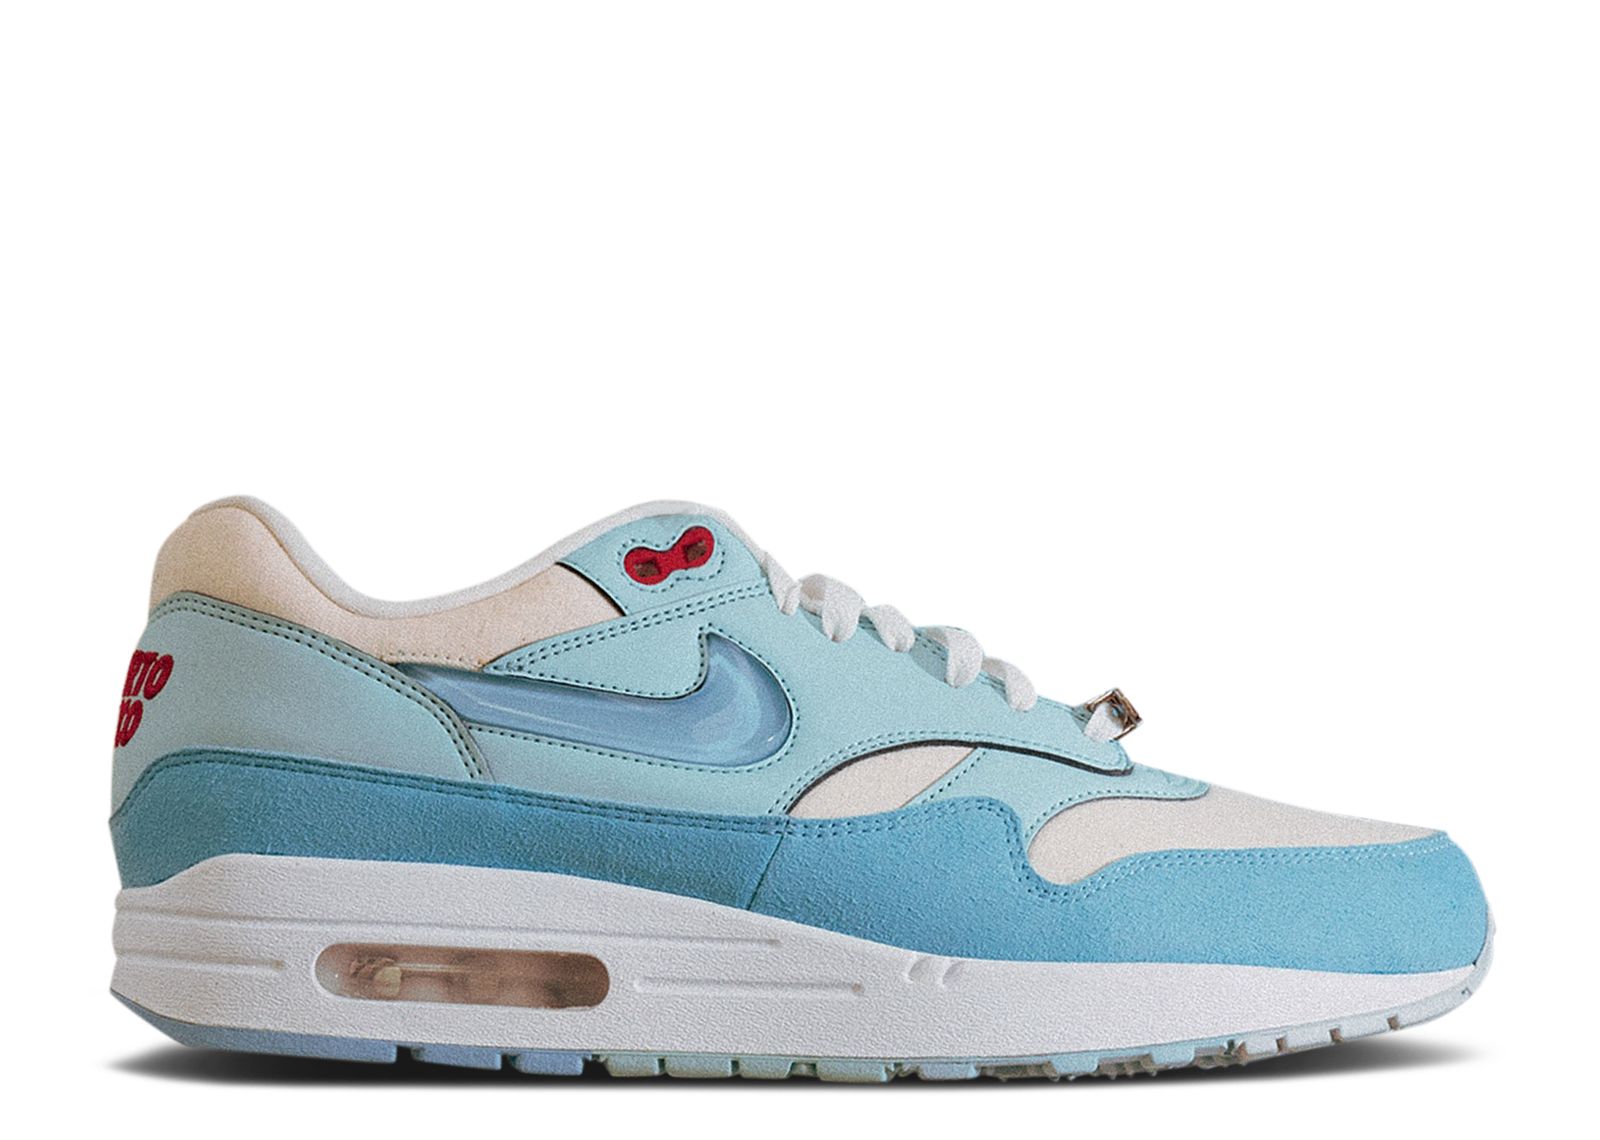 aardolie Zijdelings Injectie Air Max 1 'Puerto Rico Day Blue Gale' - Nike - FD6955 400 - blue gale/blue  gale/barely blue | Flight Club